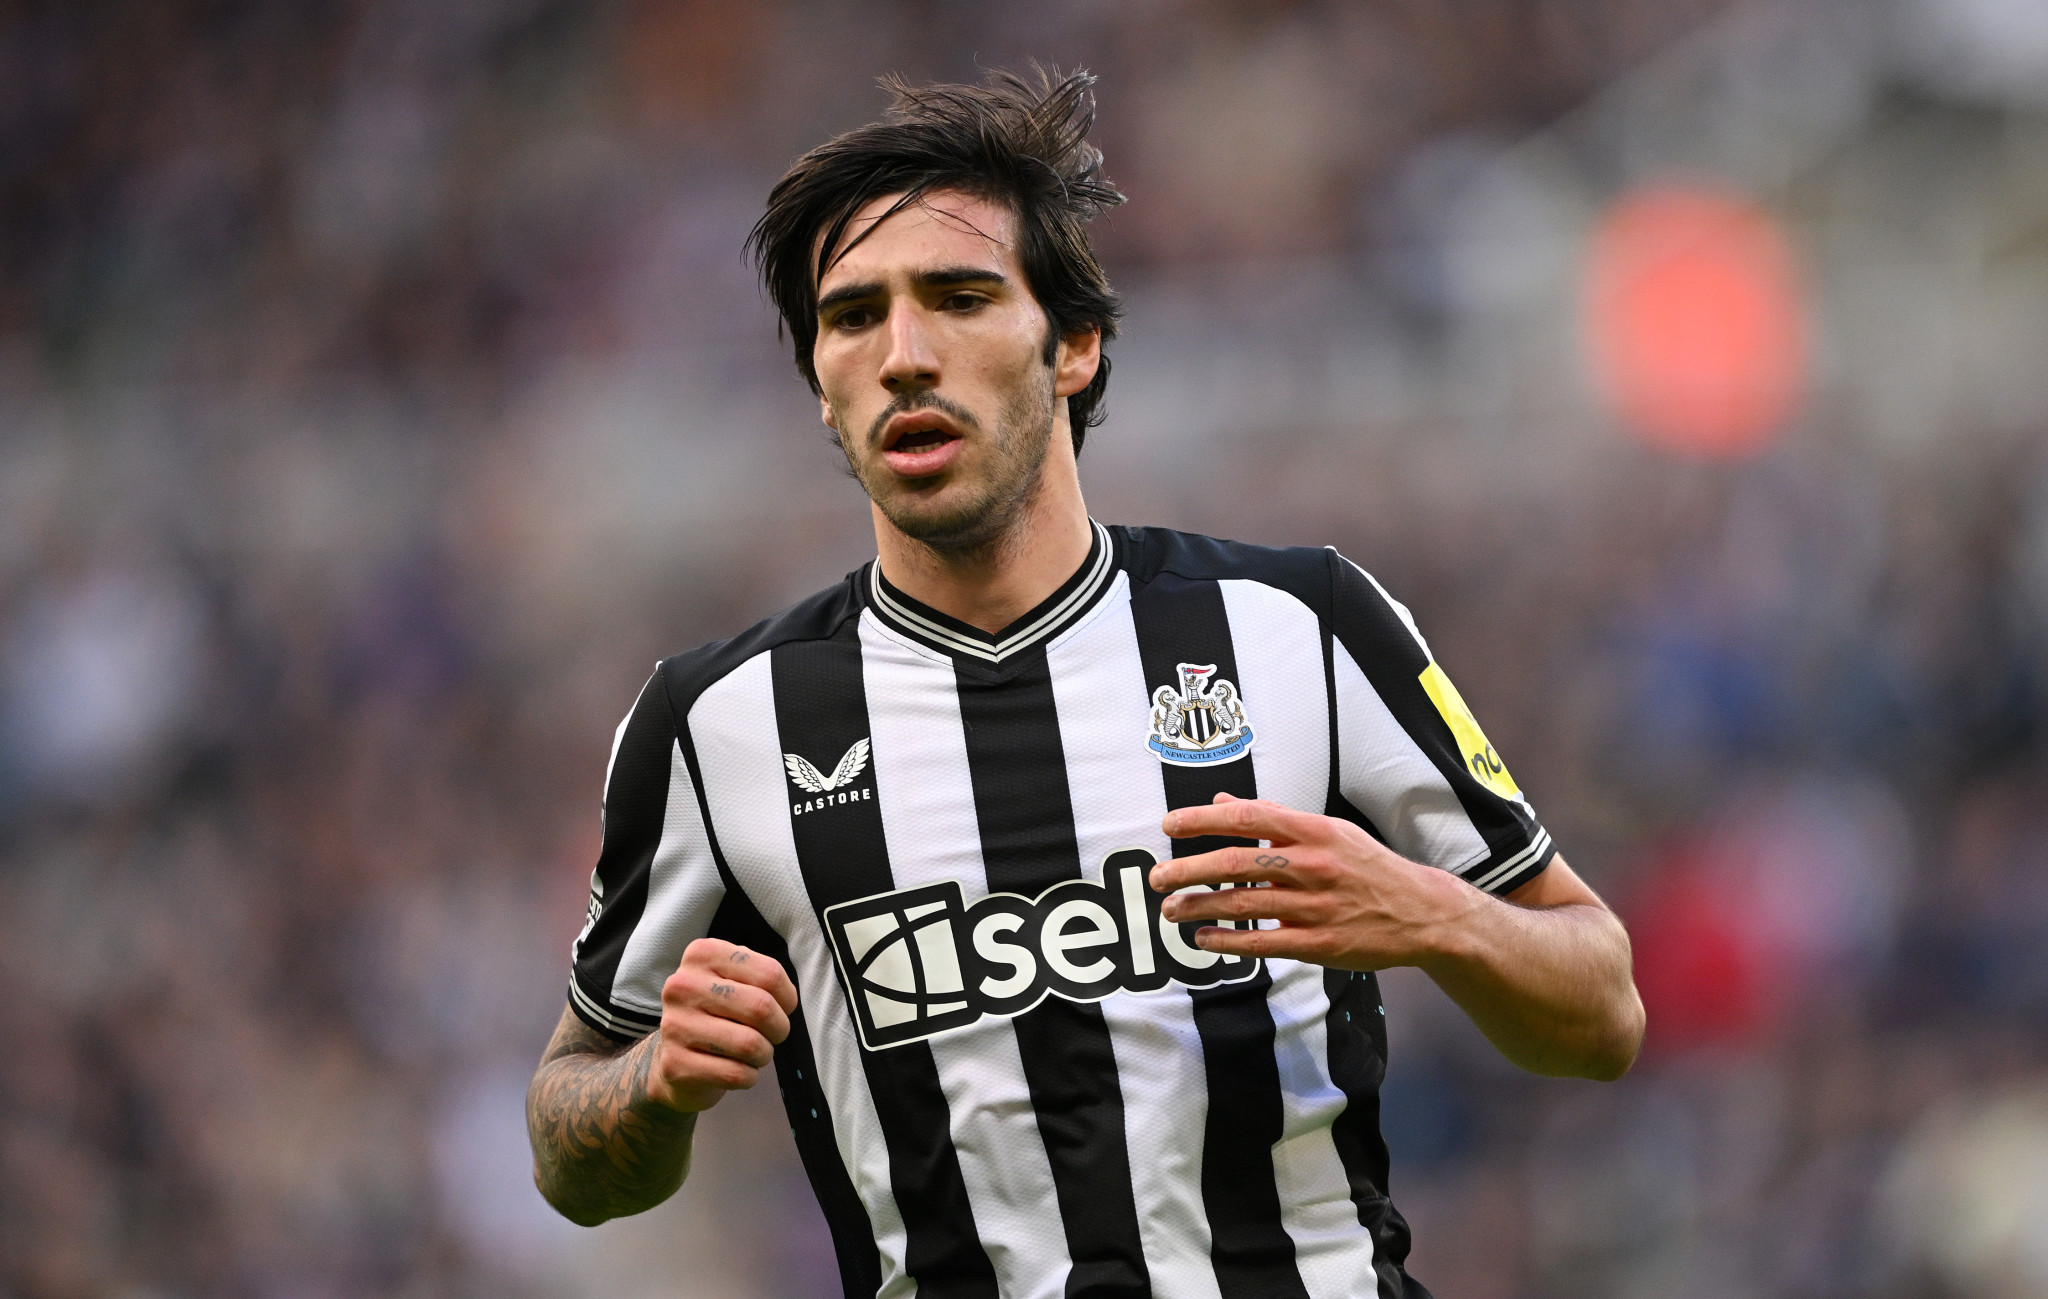 Newcastle midfielder Tonali has been given a suspended betting ban by the FA. GETTY IMAGES